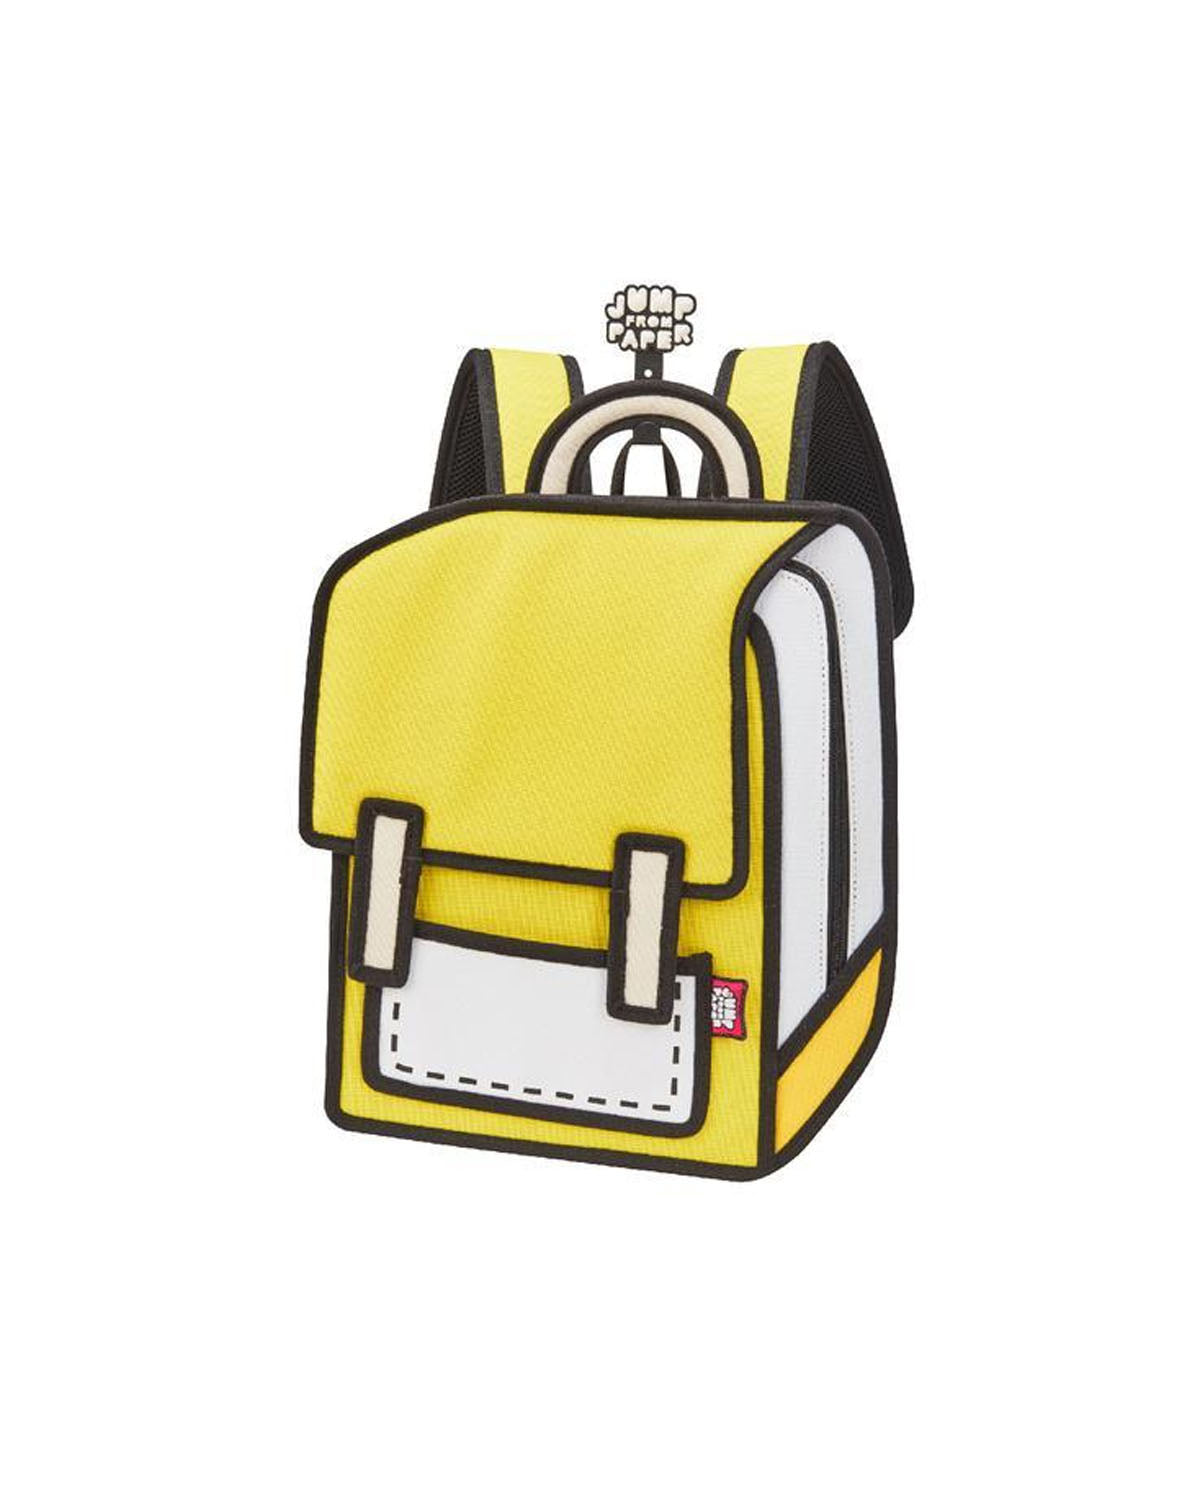 Jump from Paper Junior Spaceman Backpack Minion Yellow